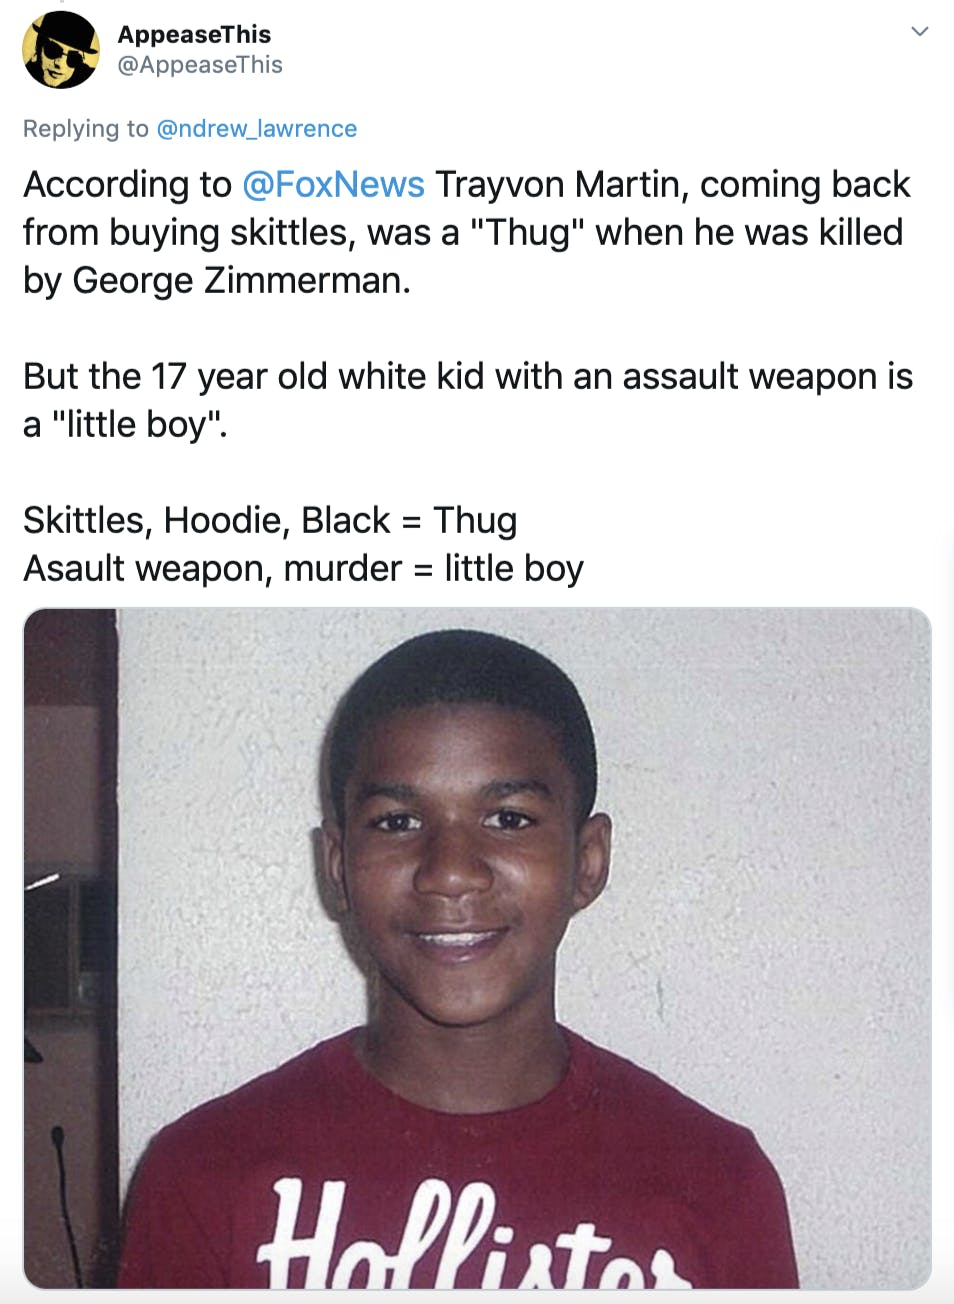 "According to  @FoxNews  Trayvon Martin, coming back from buying skittles, was a "Thug" when he was killed by George Zimmerman.  But the 17 year old white kid with an assault weapon is a "little boy".  Skittles, Hoodie, Black = Thug Asault weapon, murder = little boy" picture of Trayvon Martin smiling